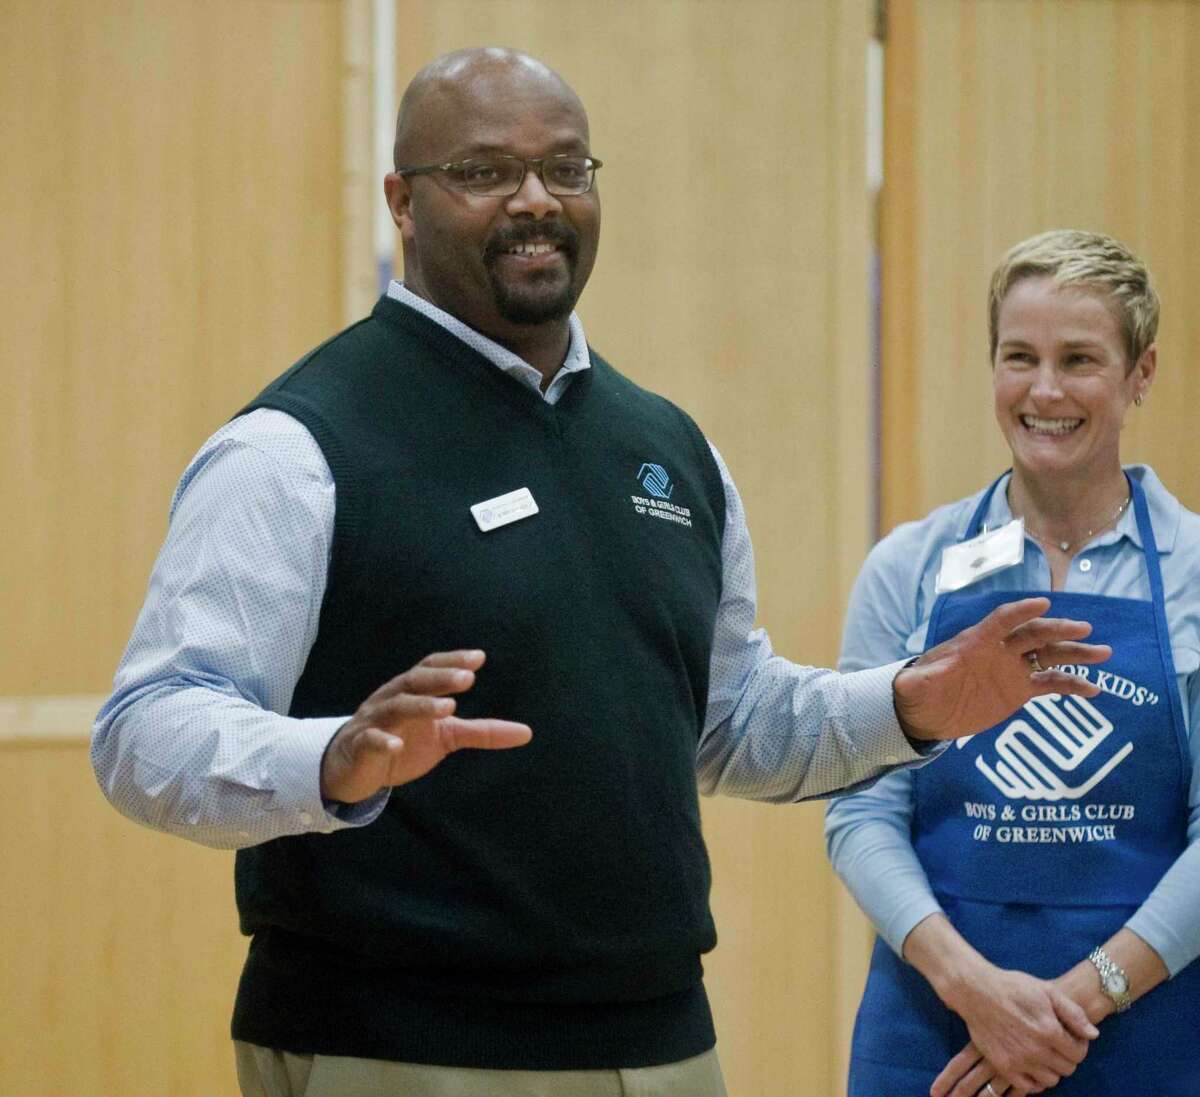 Bobby Walker Jr., CEO of the Boys and Girls Club of Greenwich, will be joining Greenwich Academy as its first Assistant Head of School for Student and Community Life, effective summer 2020.